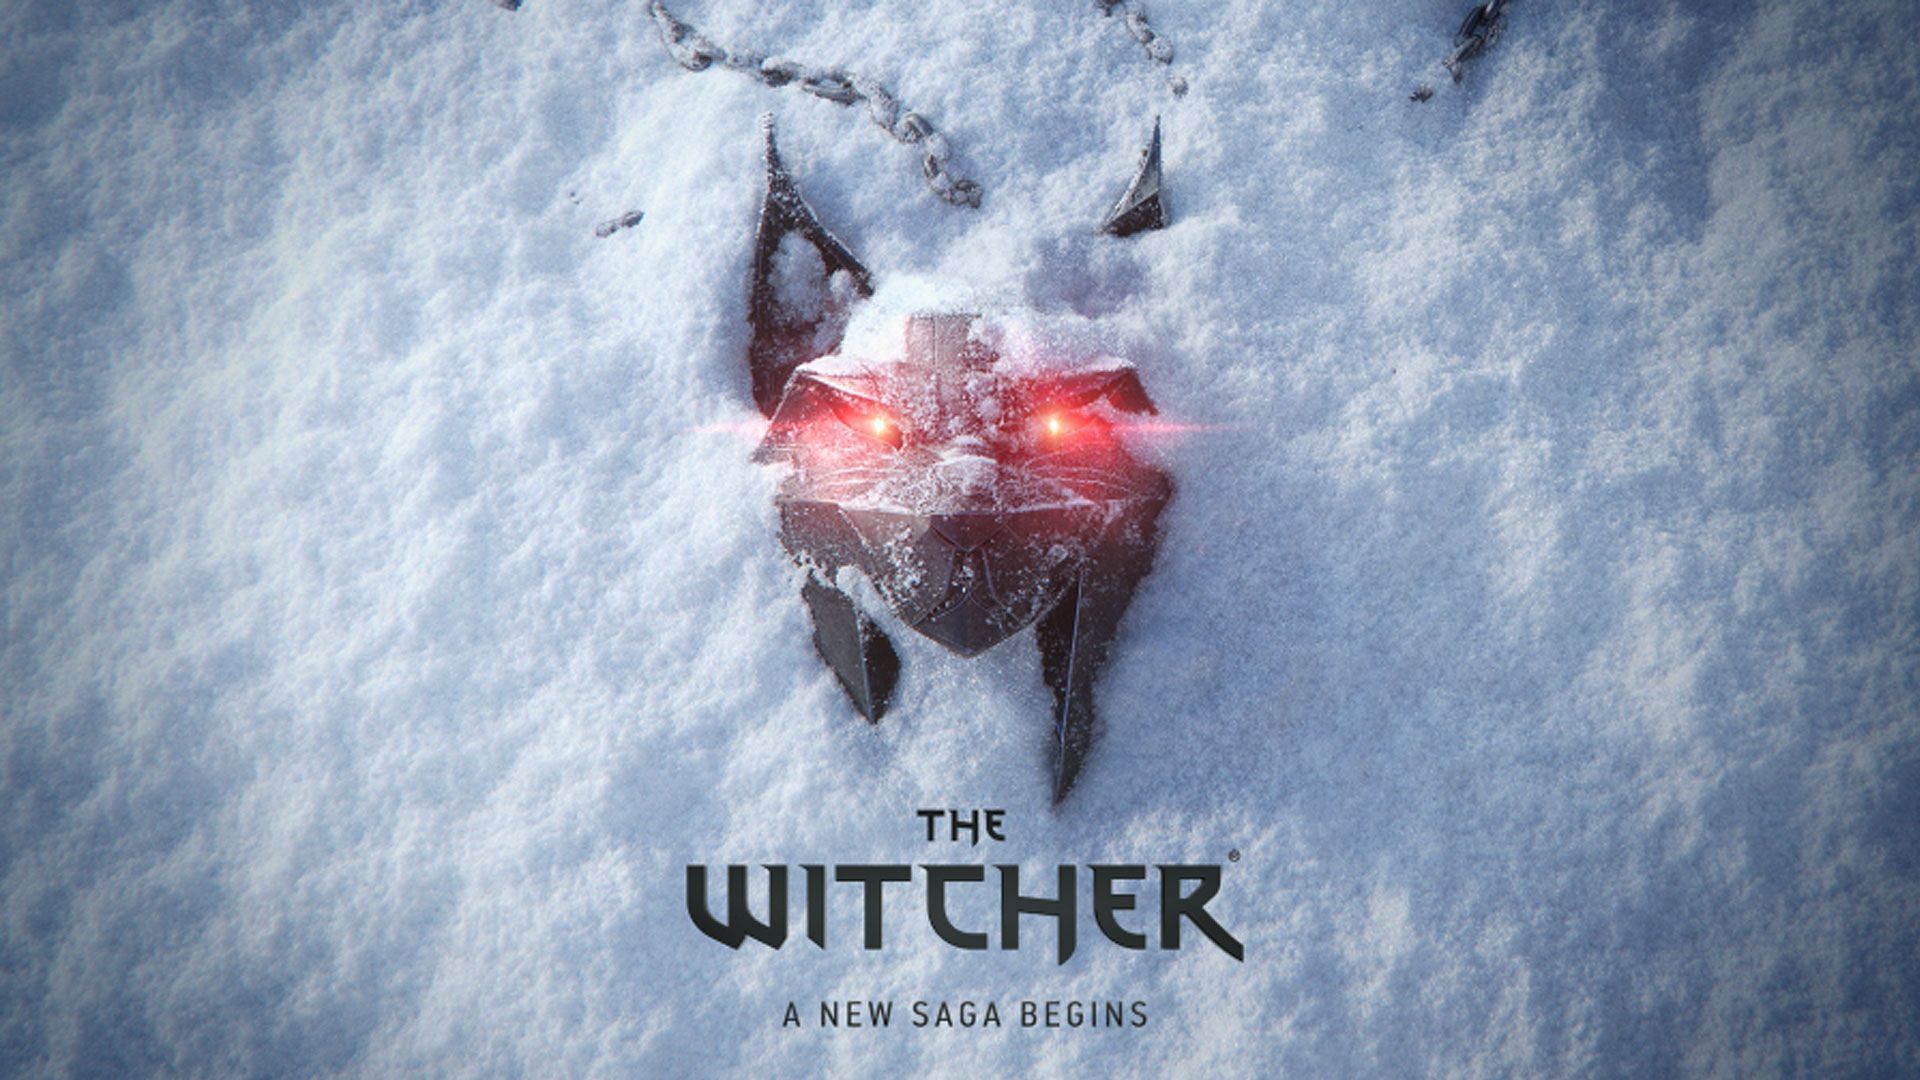 The new teaser image prompts many questions, but more information may be unveiled later this year (Image via CD Projekt Red)